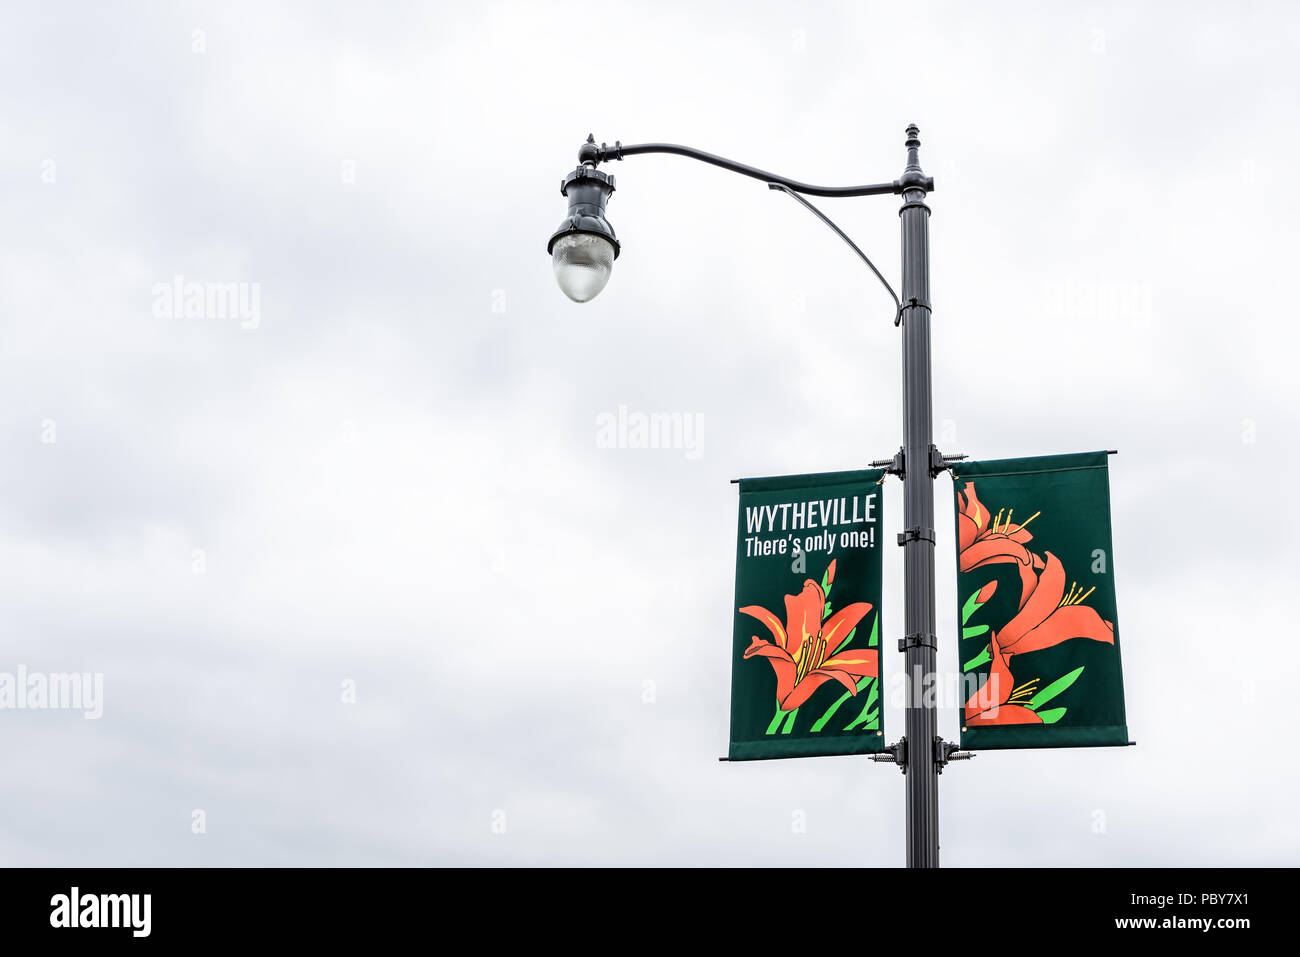 Wytheville, USA - April 19, 2018: Small town village sign on lamp post in southern south Virginia with 'there's only one' banner Stock Photo